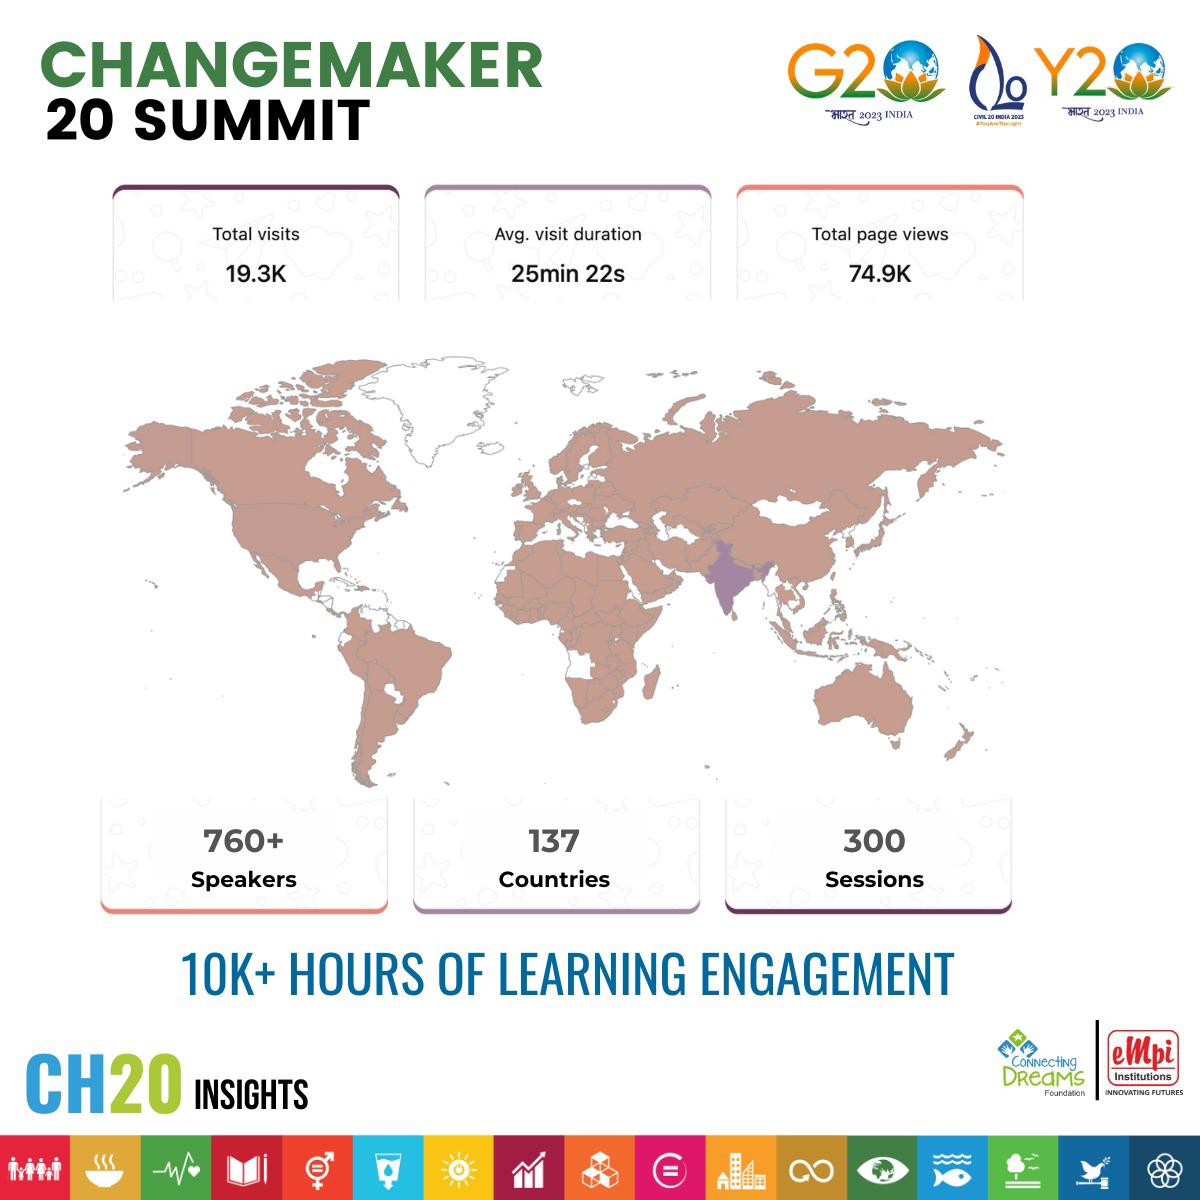 Exciting News! We're gearing up to release the recordings from the game-changing sessions at the #Changemaker20 Summit!  Get ready to amplify the impact of these powerful conversations. Stay tuned for the summit's wisdom to be unleashed! #ChangeMakersUnite' @g20org @IndiaY20 @ANI